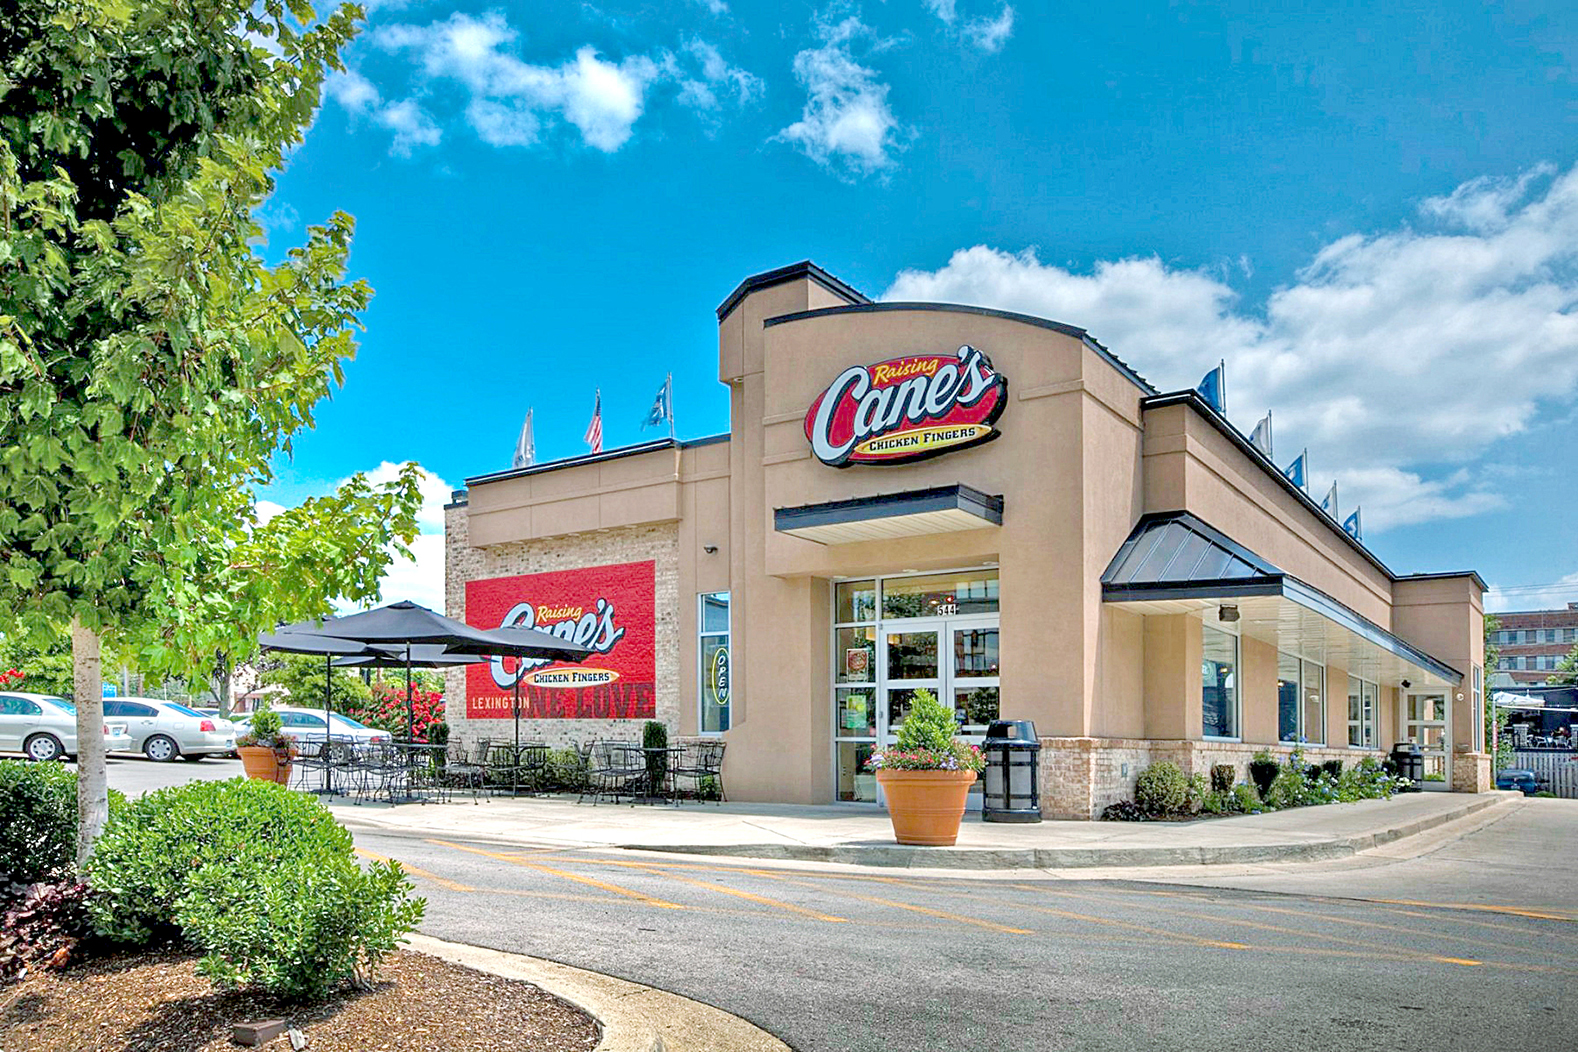 Raising Cane’s on track to be a $2B company by late 2020